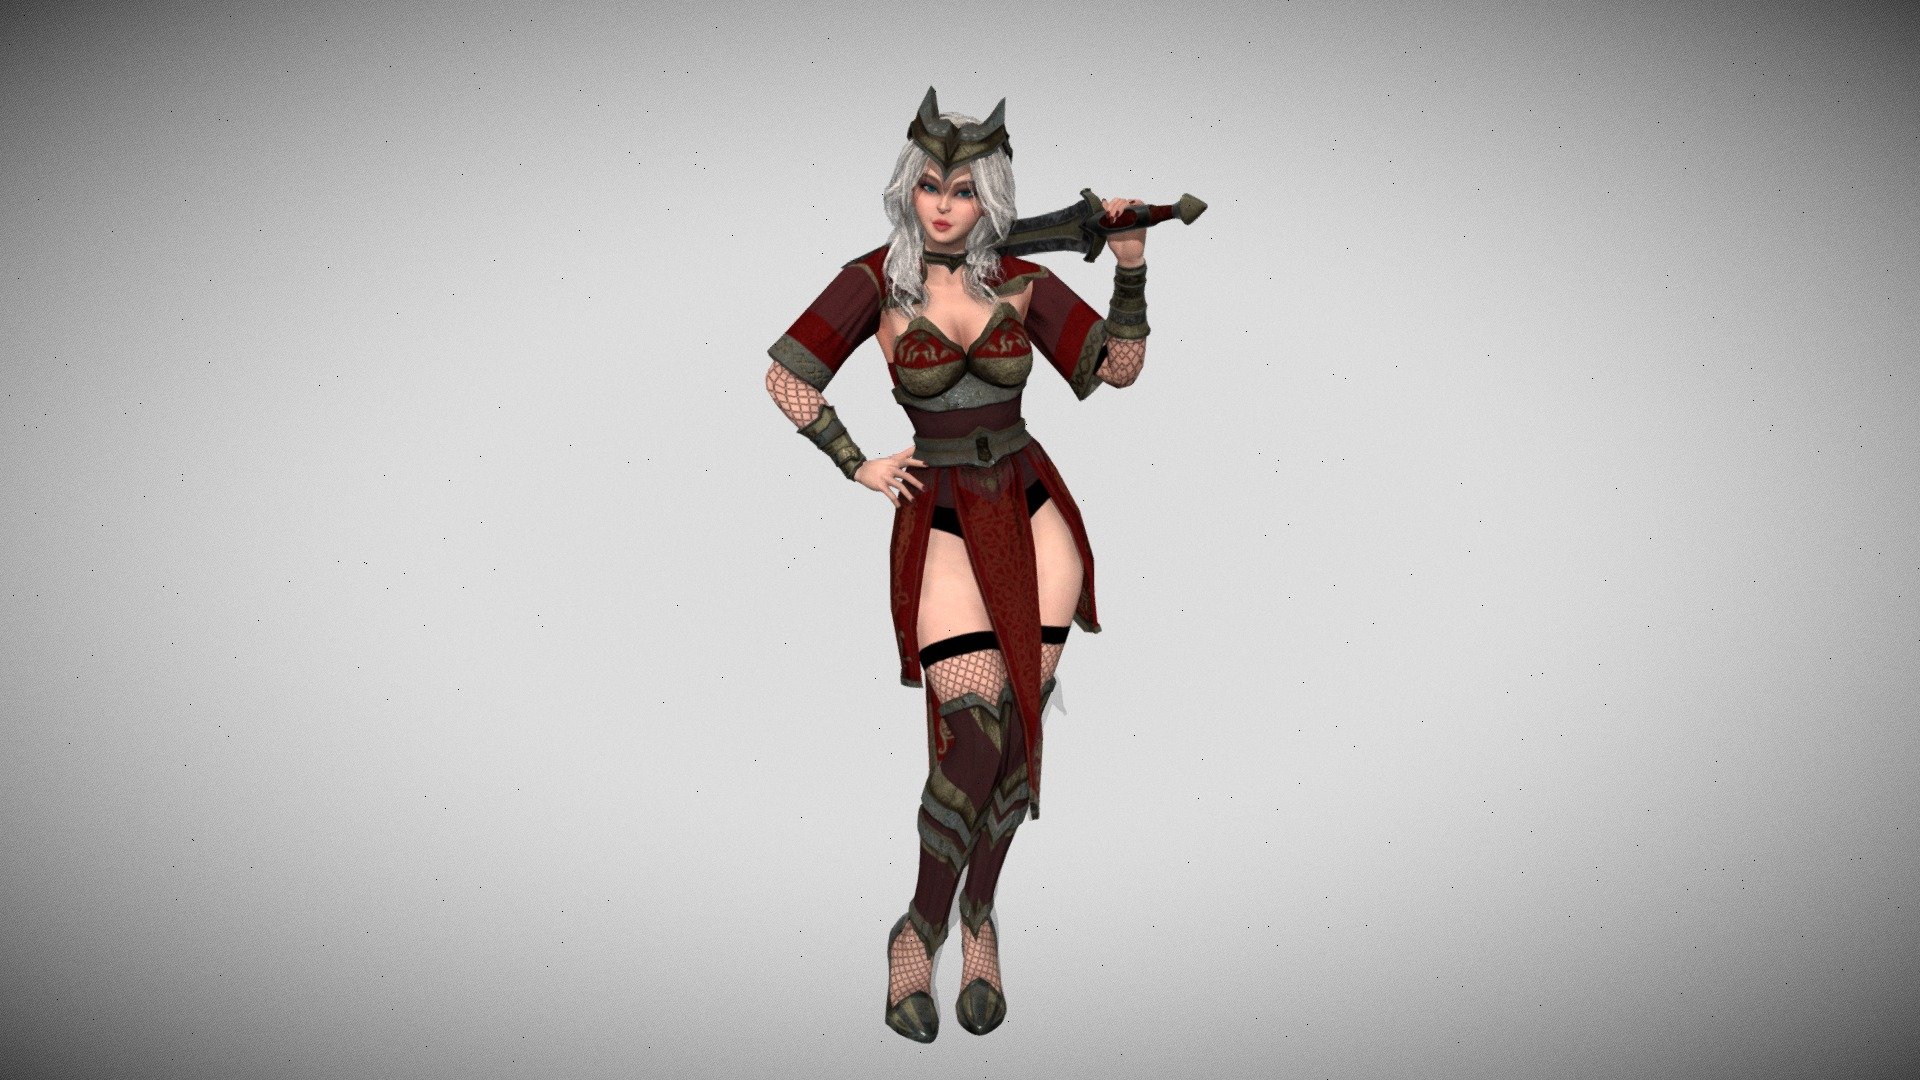 Full model here - https://www.artstation.com/marketplace/p/xmXea/red-knight-lady

Model has 2 body shapes - without clothes(cencored version in engines) with clothes (both are rigged and with blendshapes)

faces - 15527, tris - 29897, verts - 17623

Rigged with Epic SkeletonHumanoid rig. Easy animations retarget!

Has Morph Targets, Blendshapes, AppleARKit Face Blendshapes(can be used for face mocap (live stream))

4K Textures - normal, metallic, roughness, albedo, opacity, emissive(PBR Textures Metal/Roughness). Has many haireyesclothodyface colors. 

Texture sets - Body, Face, Cloth, Eyes, Cornea, Hair, Weapon

Model has different texture colors.

My ArtStation - https://www.artstation.com/elsianne - Red Knight Lady - 3D model by MoonCat (@di-luna) 3d model